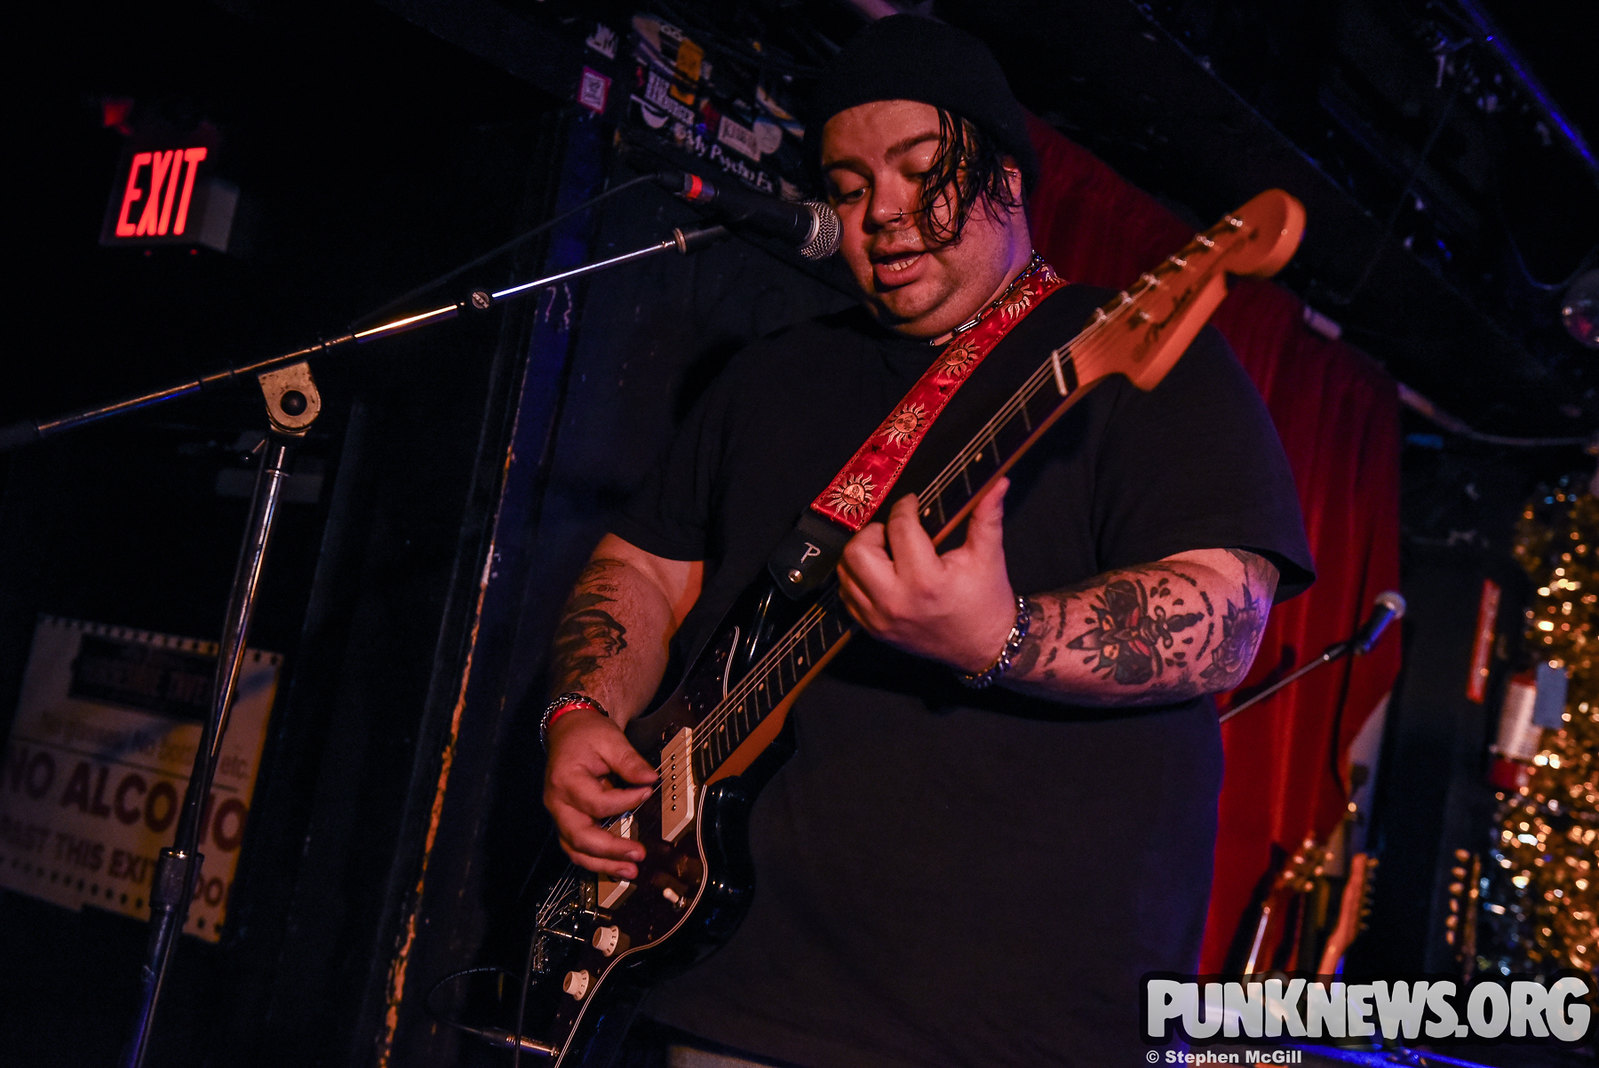 Softcult at The Horseshoe Tavern, 11/11